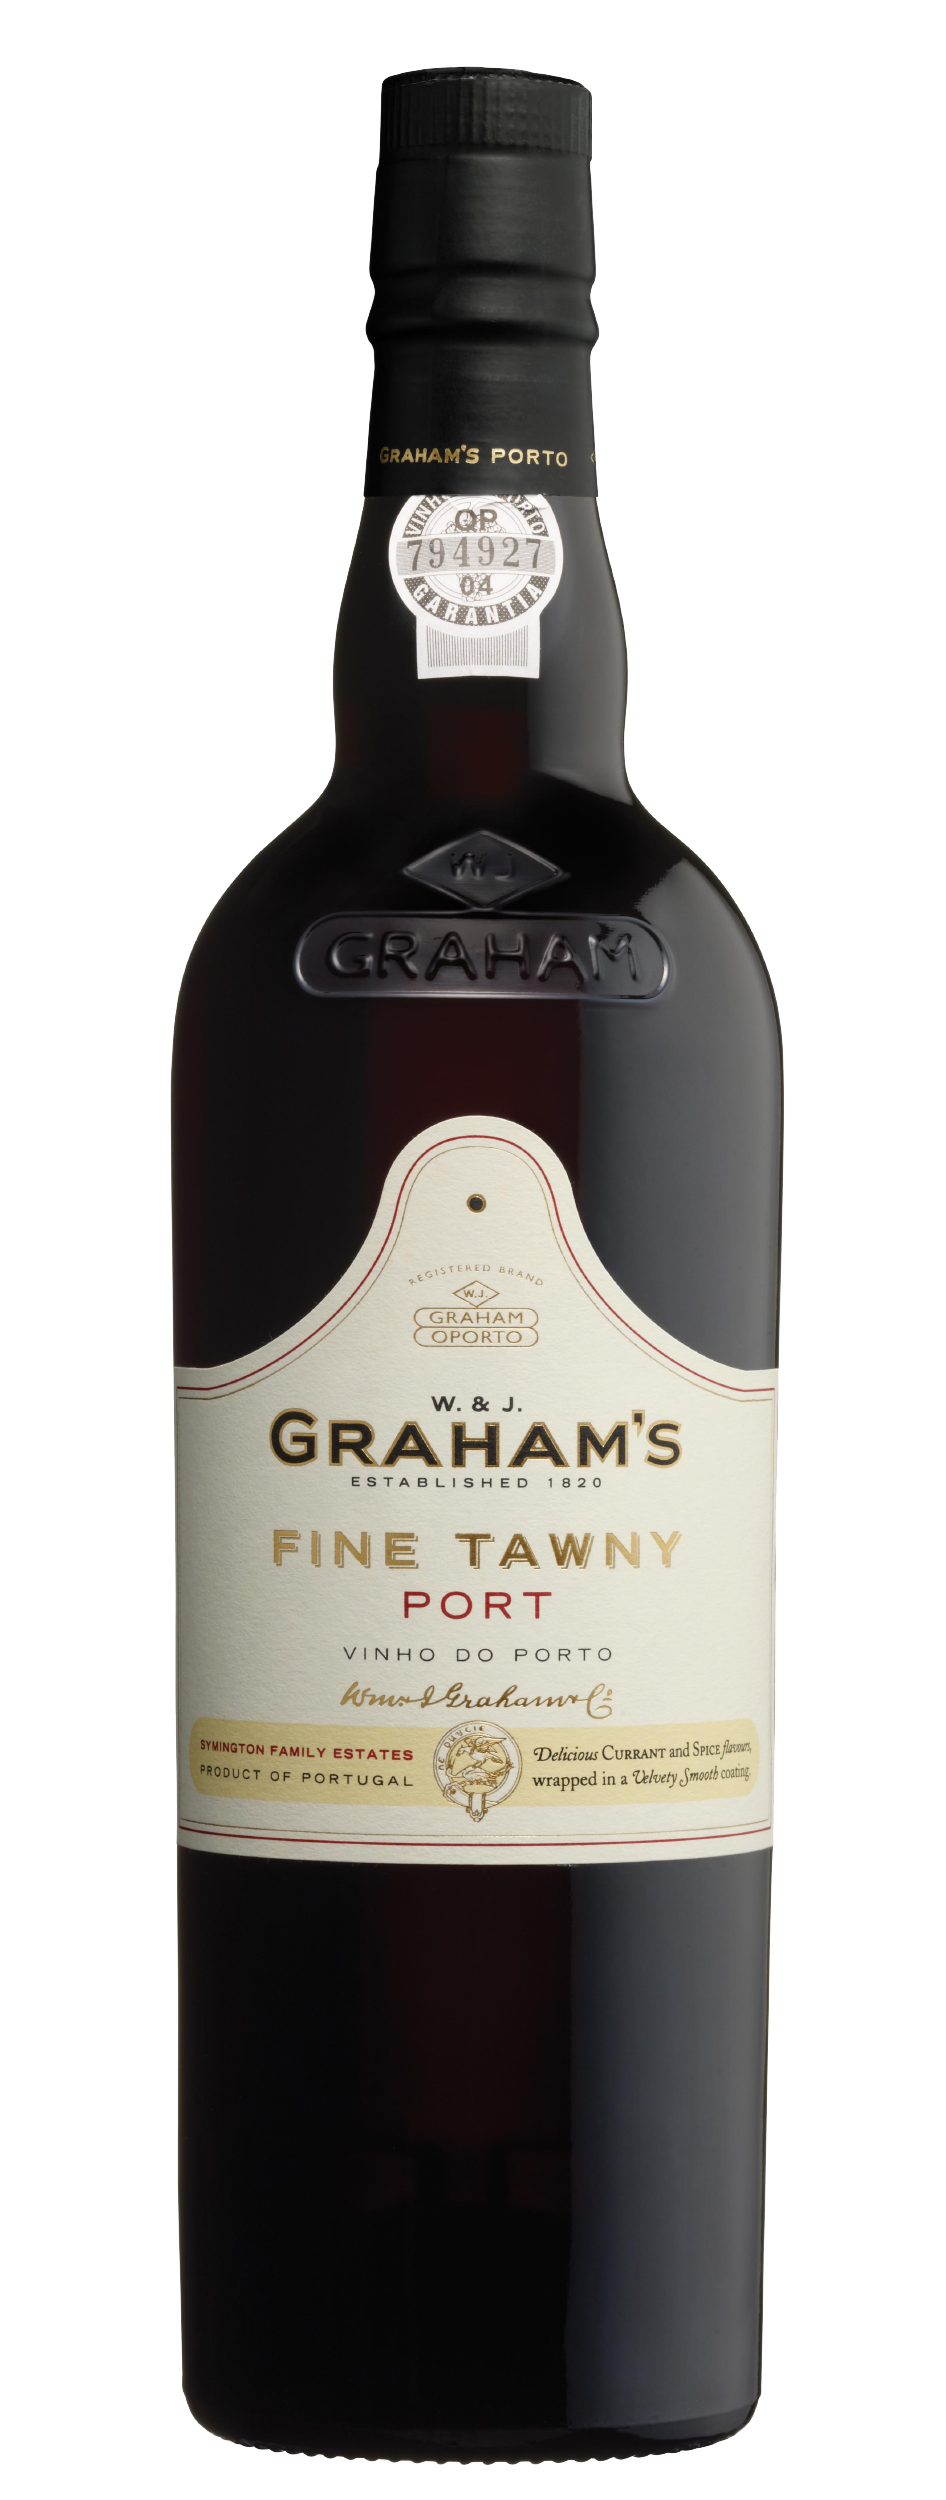 Product Image for GRAHAM'S FINE TAWNY PORT